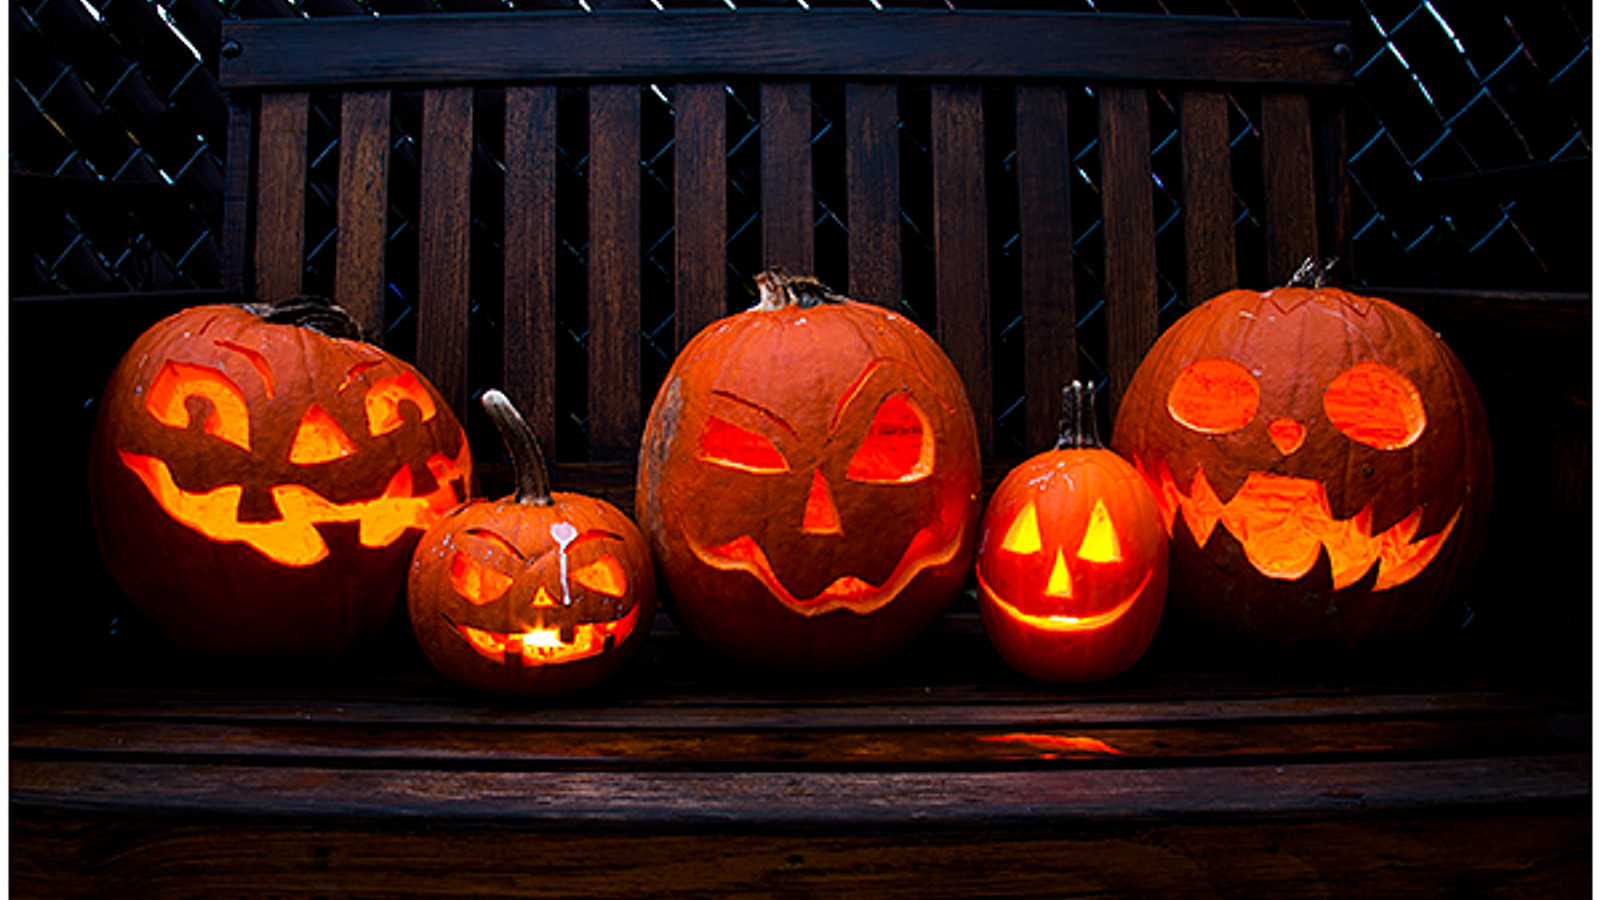 When did Halloween first start and why do we celebrate it?